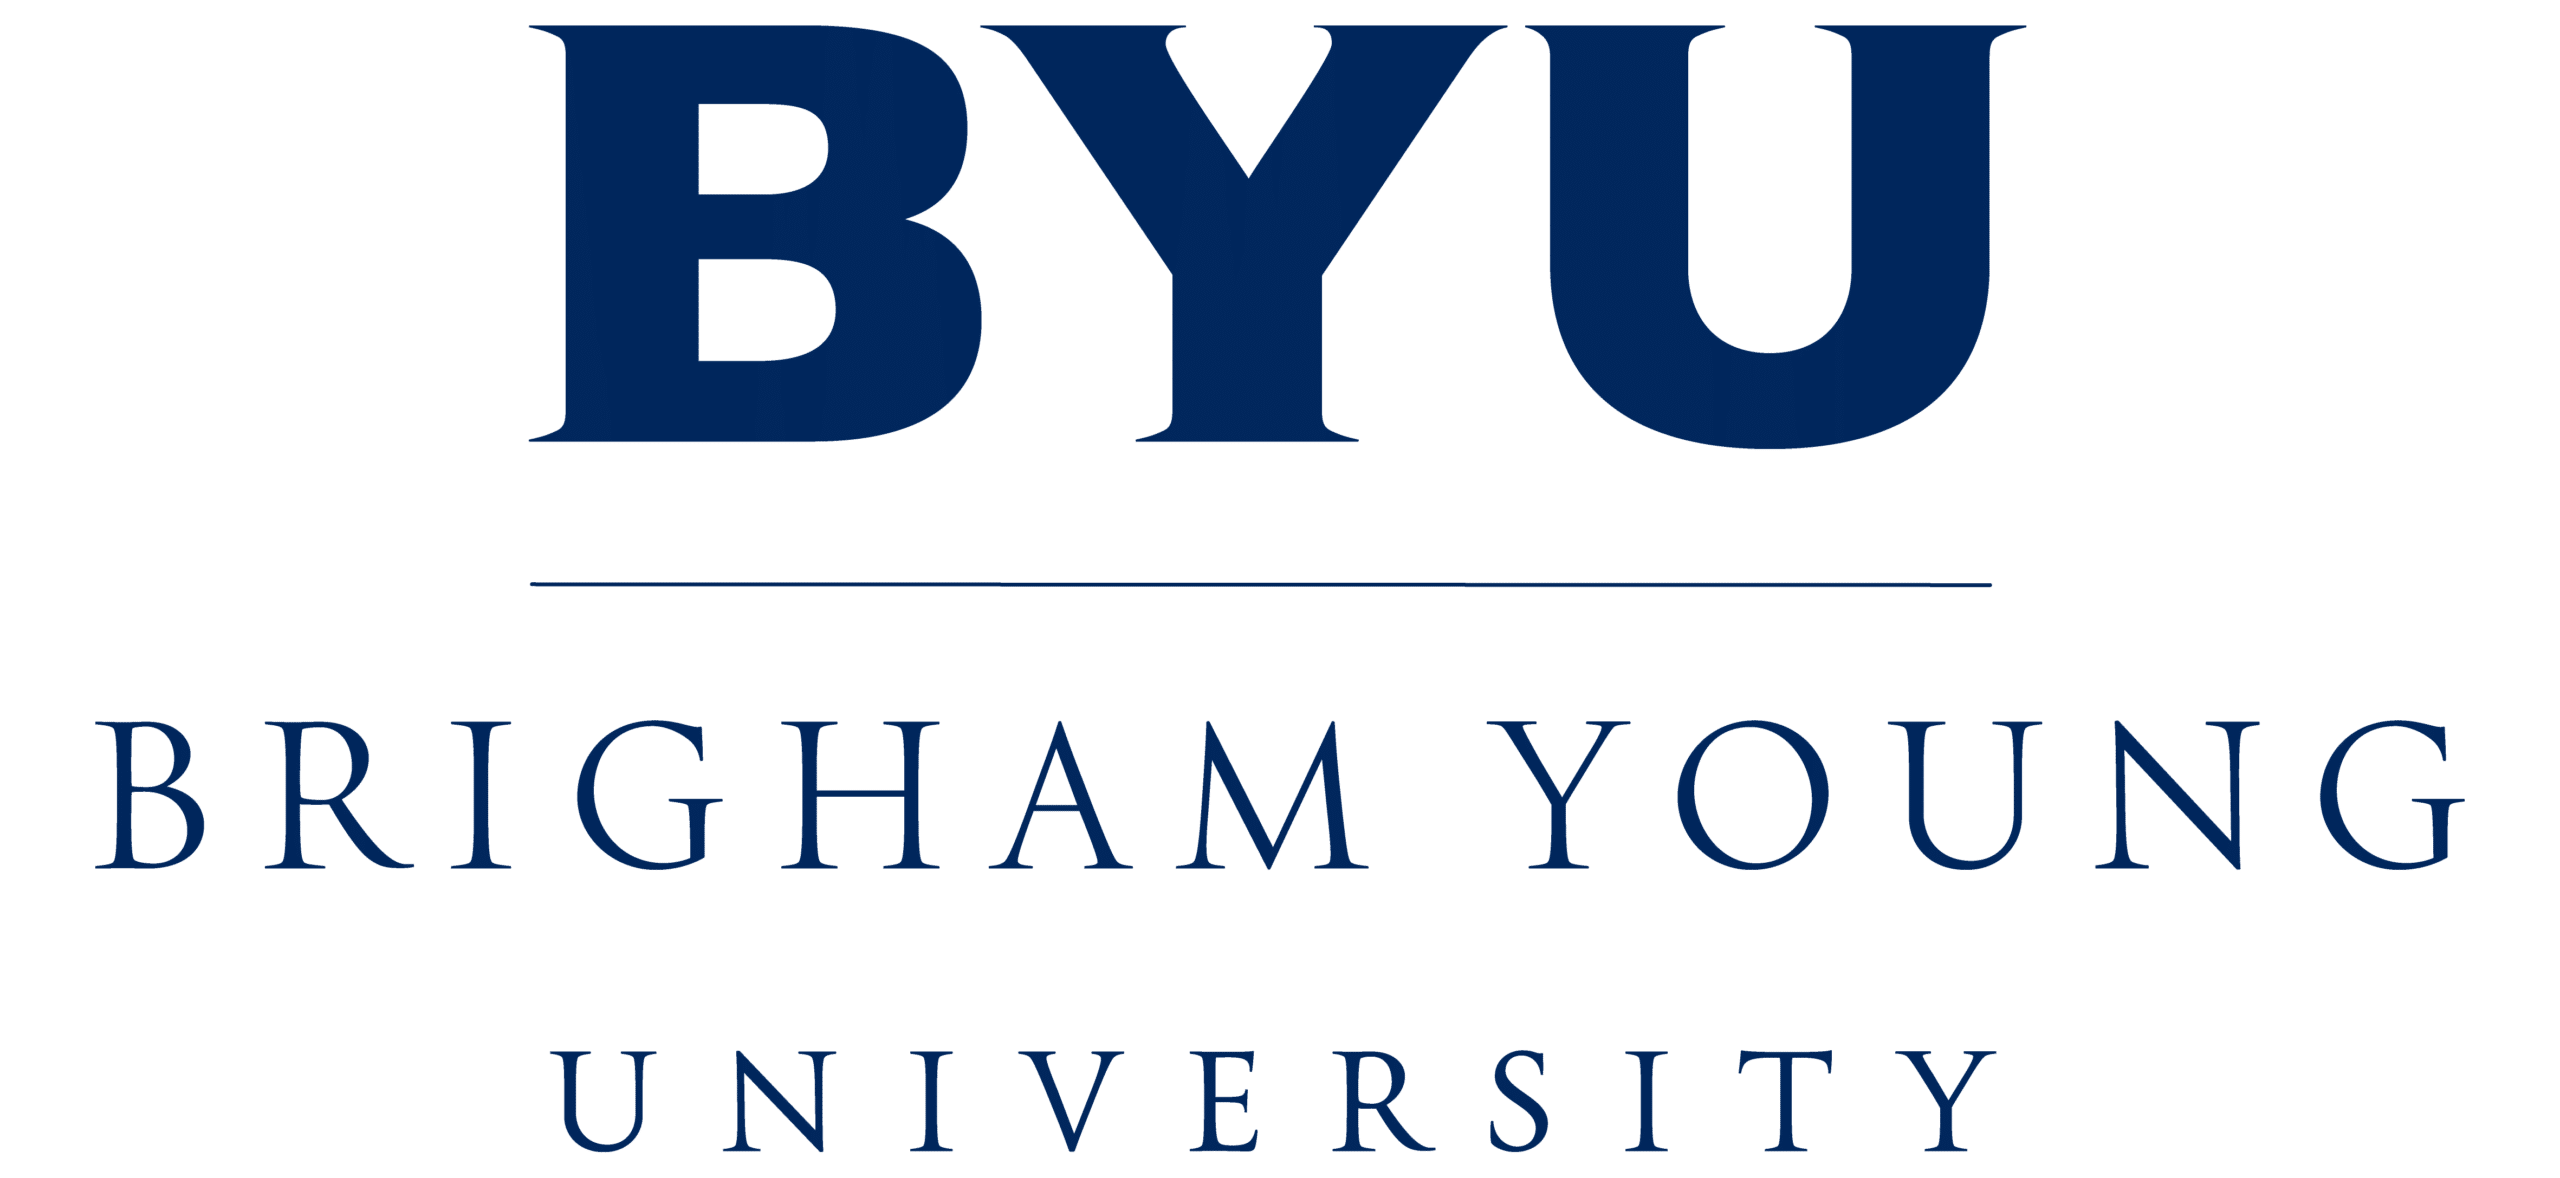 Brigham Young University CoGen Plant awarded to Bodell